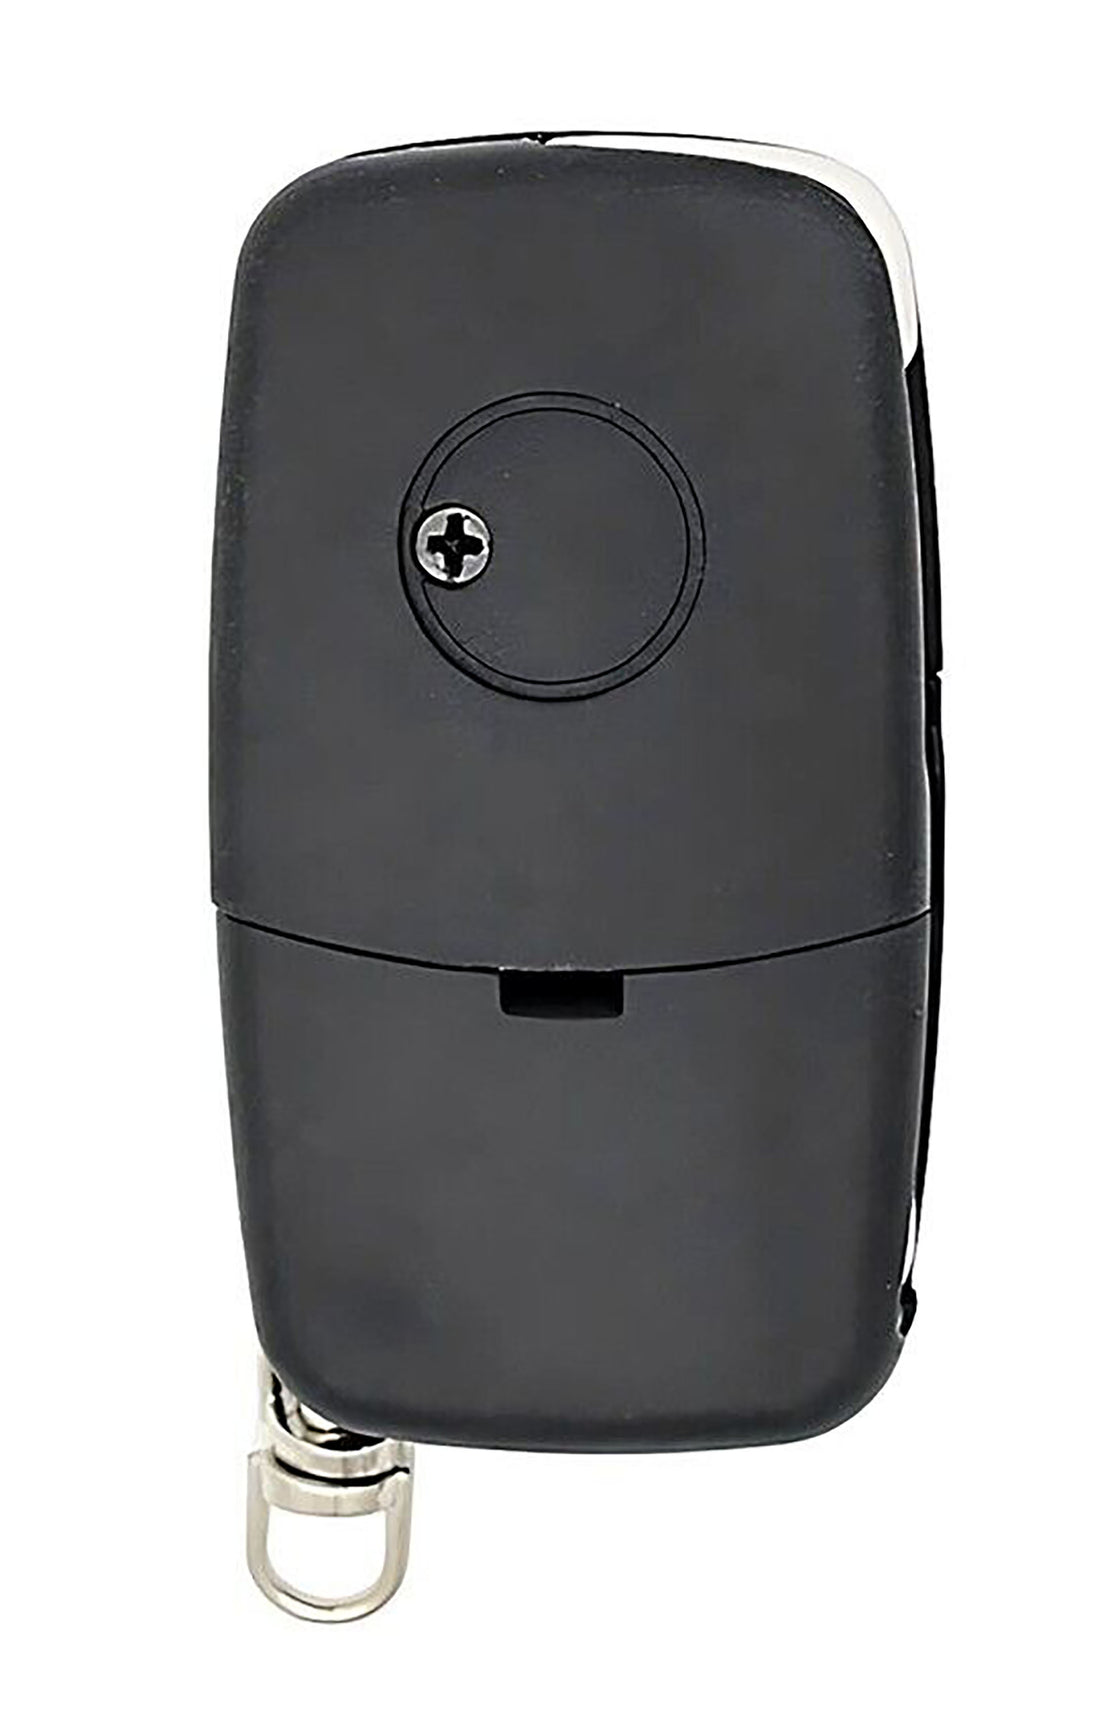 1x New Quality Replacement Key Fob Remote Compatible with & Fit For Volkswagen VW Vehicles - MPN NBG8137T-02